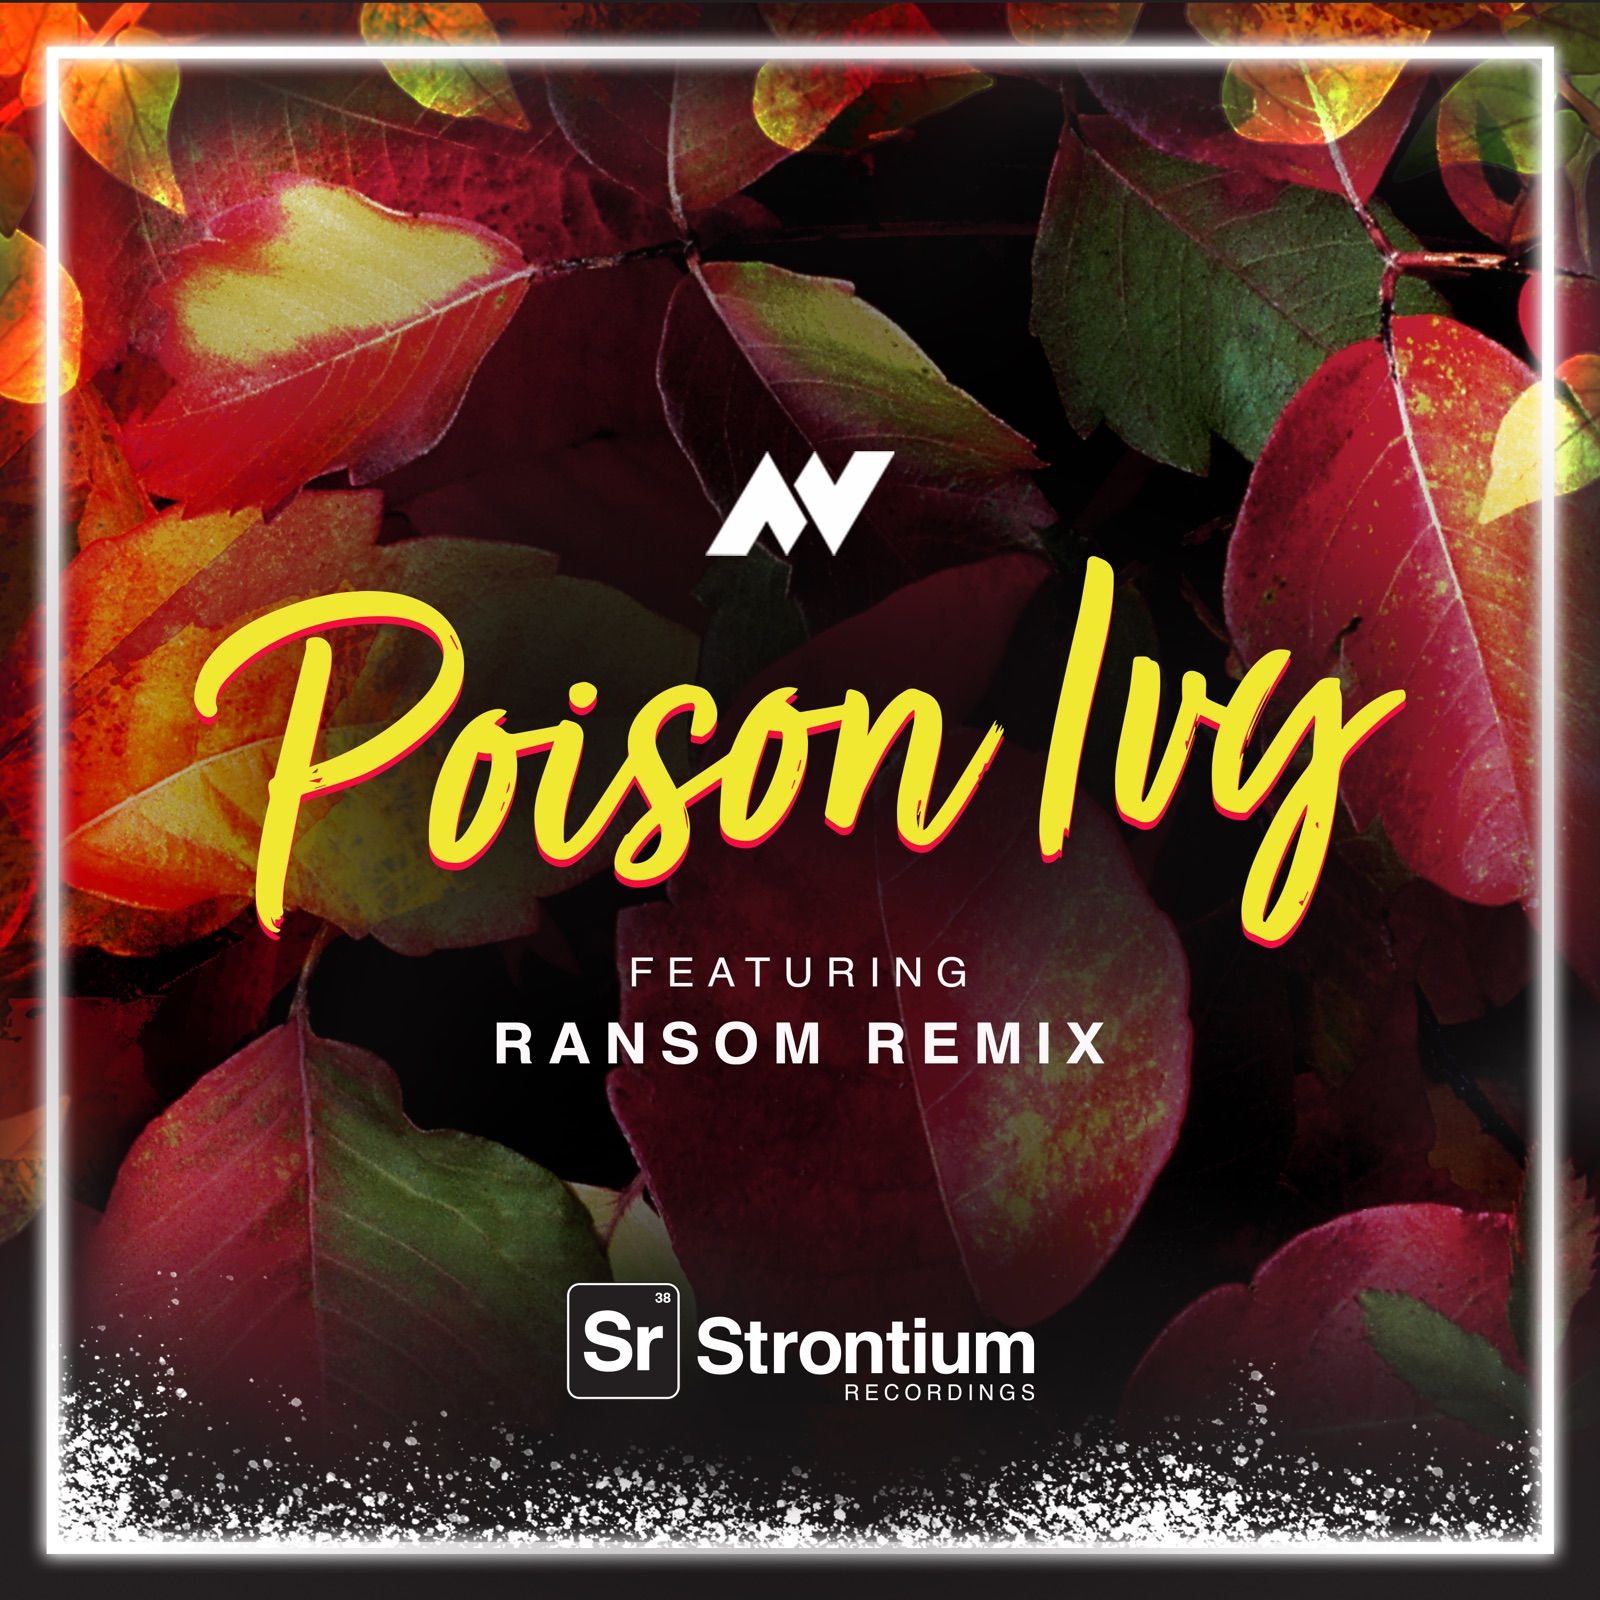 Poison Ivy (featuring Ransom remix)